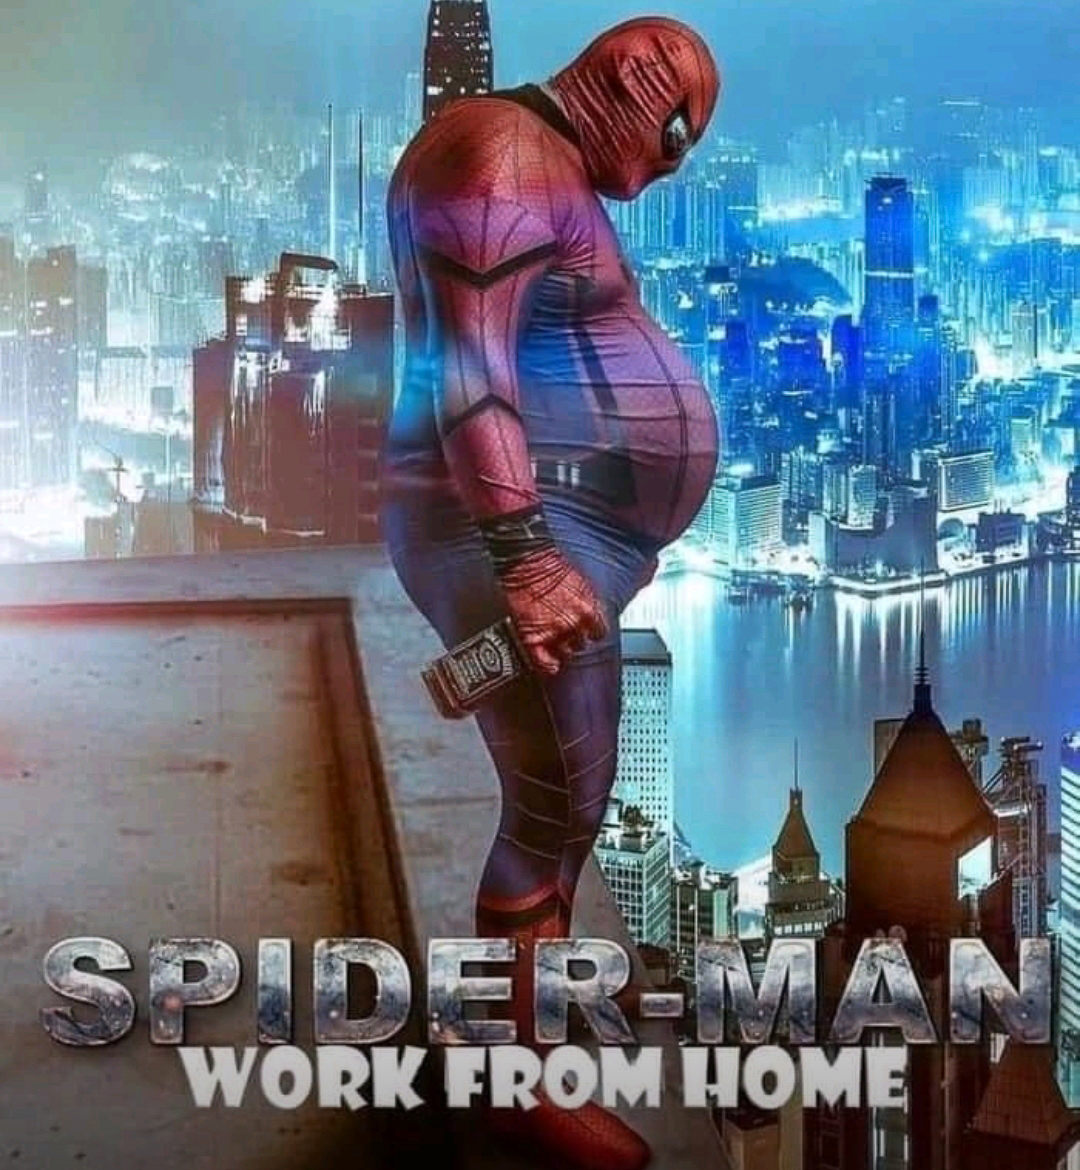 Spiderman Working from Home  ~~  